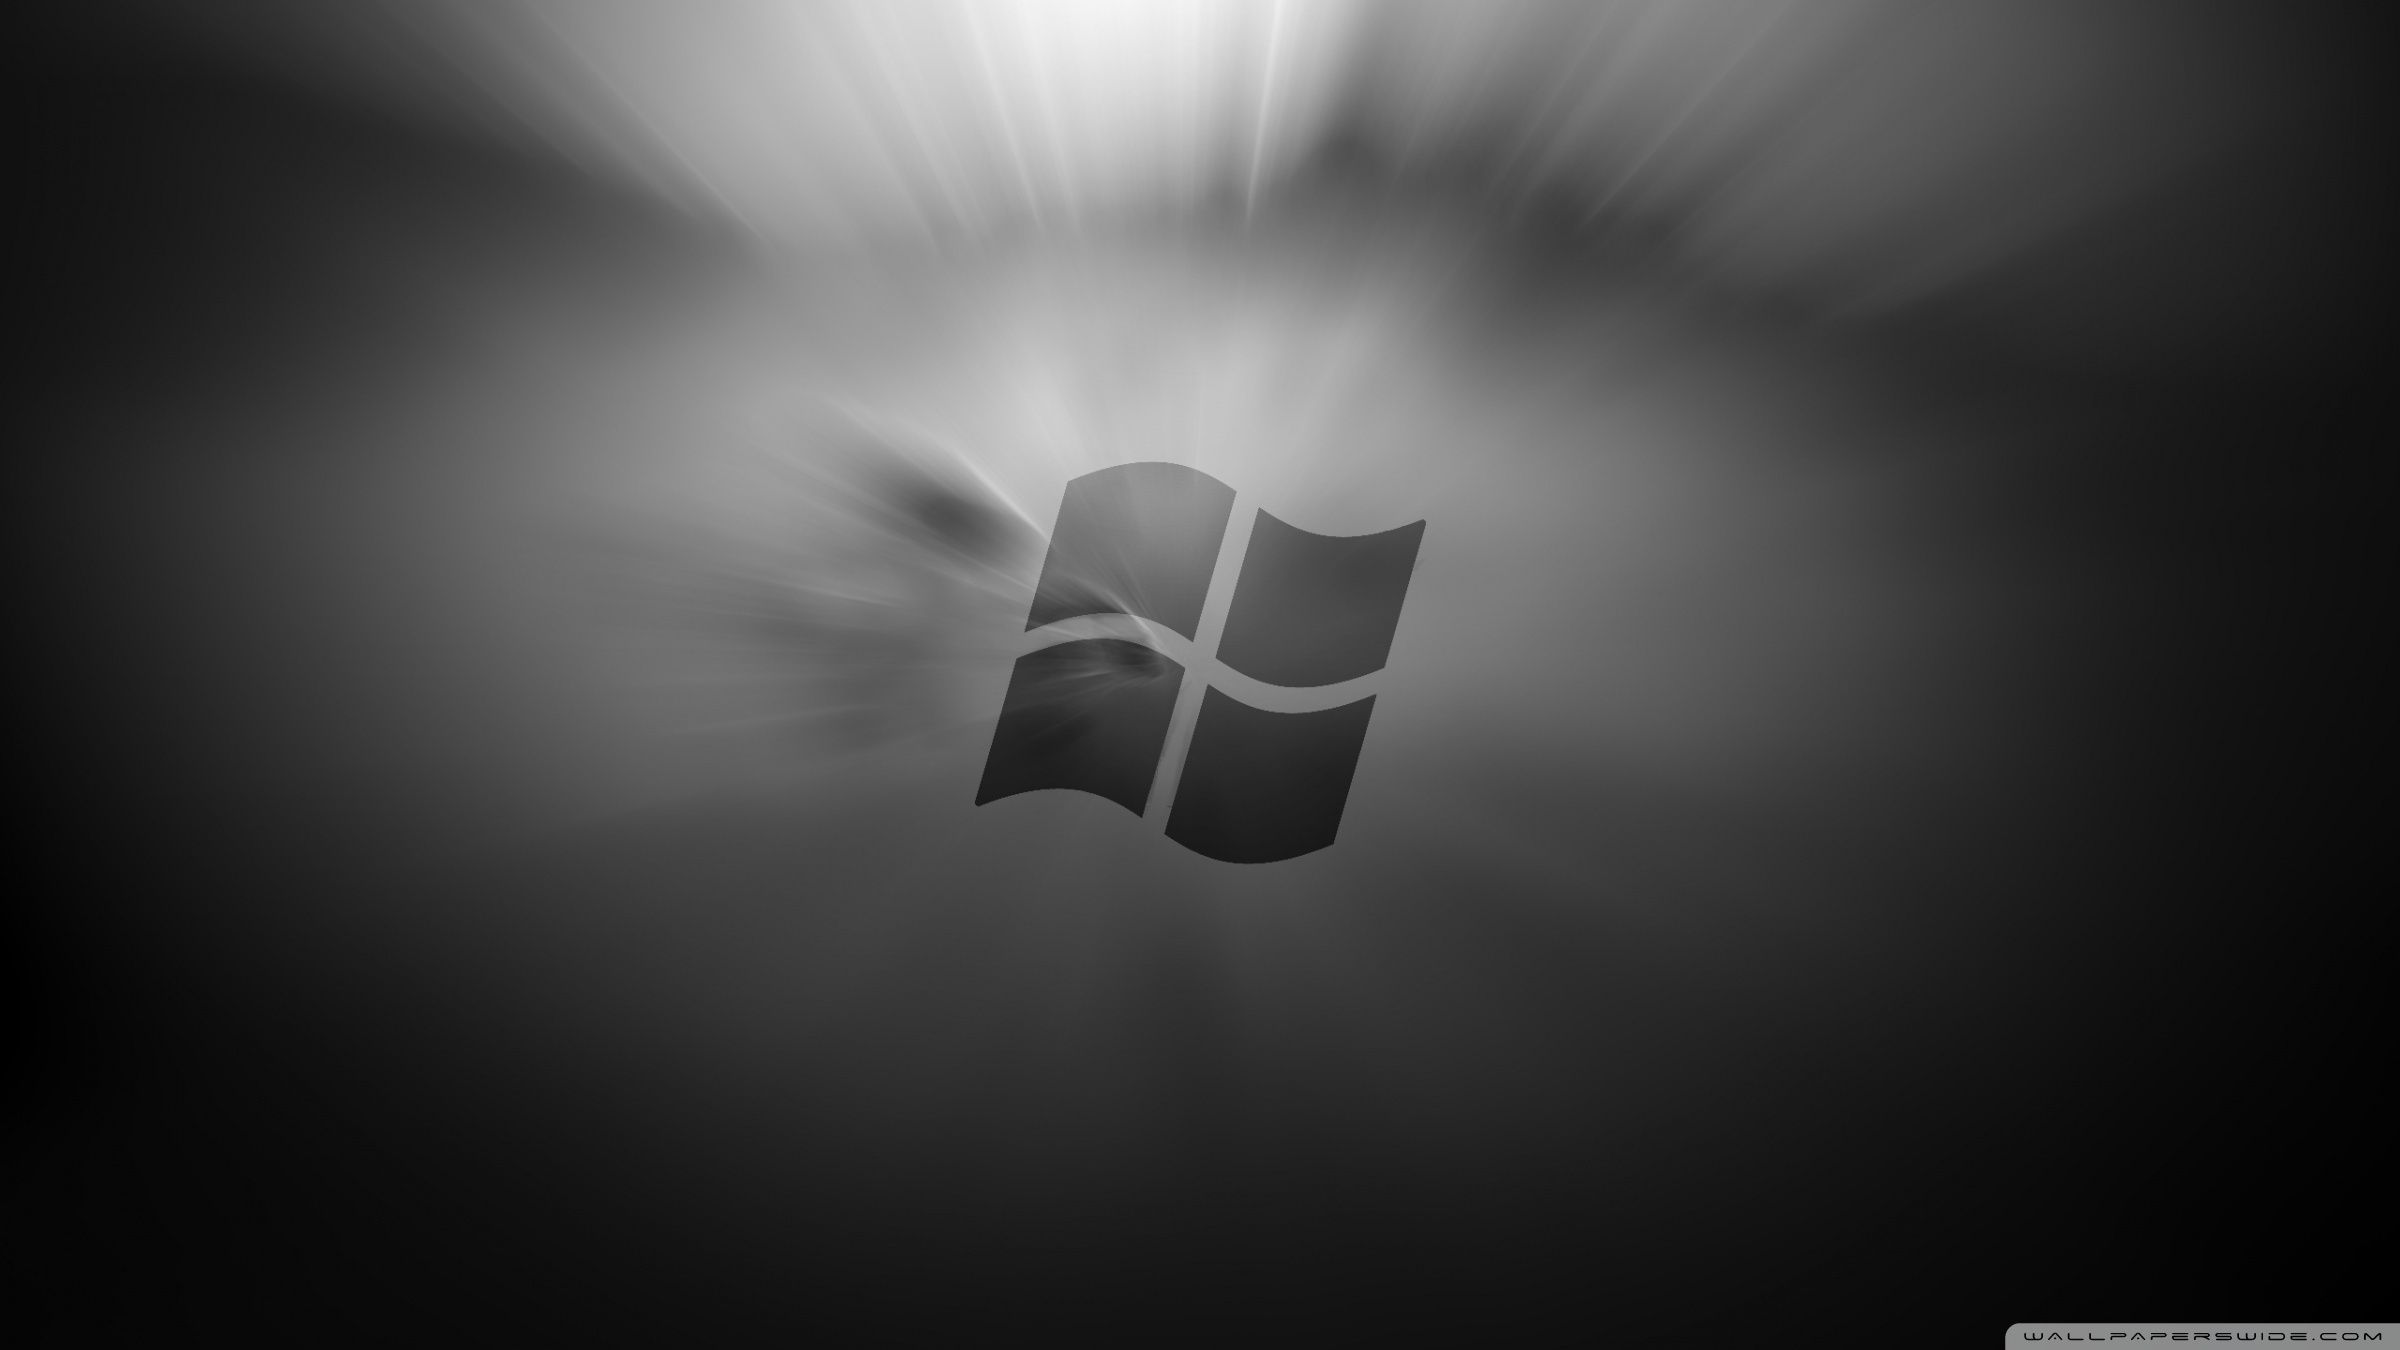 Windows 8 black theme wallpapers and images - wallpapers, pictures